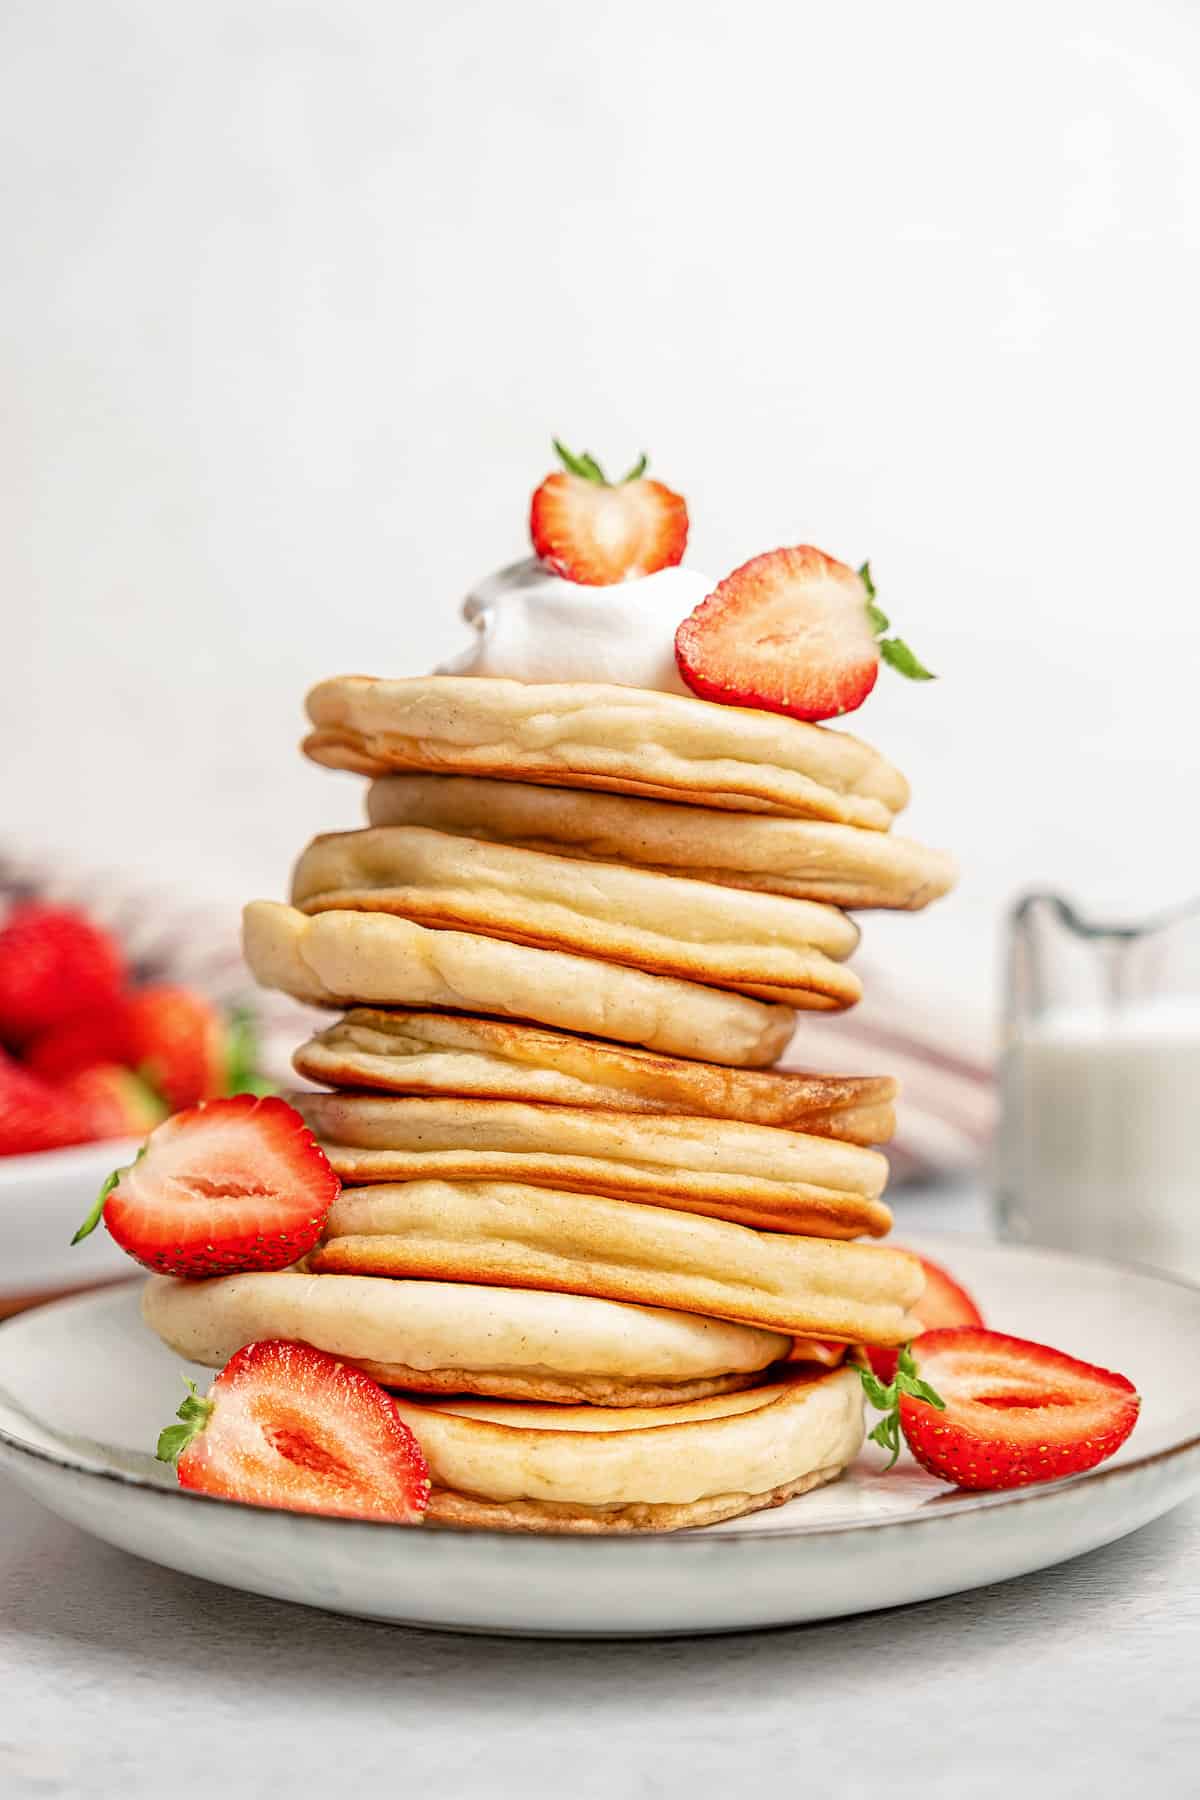 A tall stack of gluten-free pikelets on a plate garnished with whipped cream and sliced strawberries.